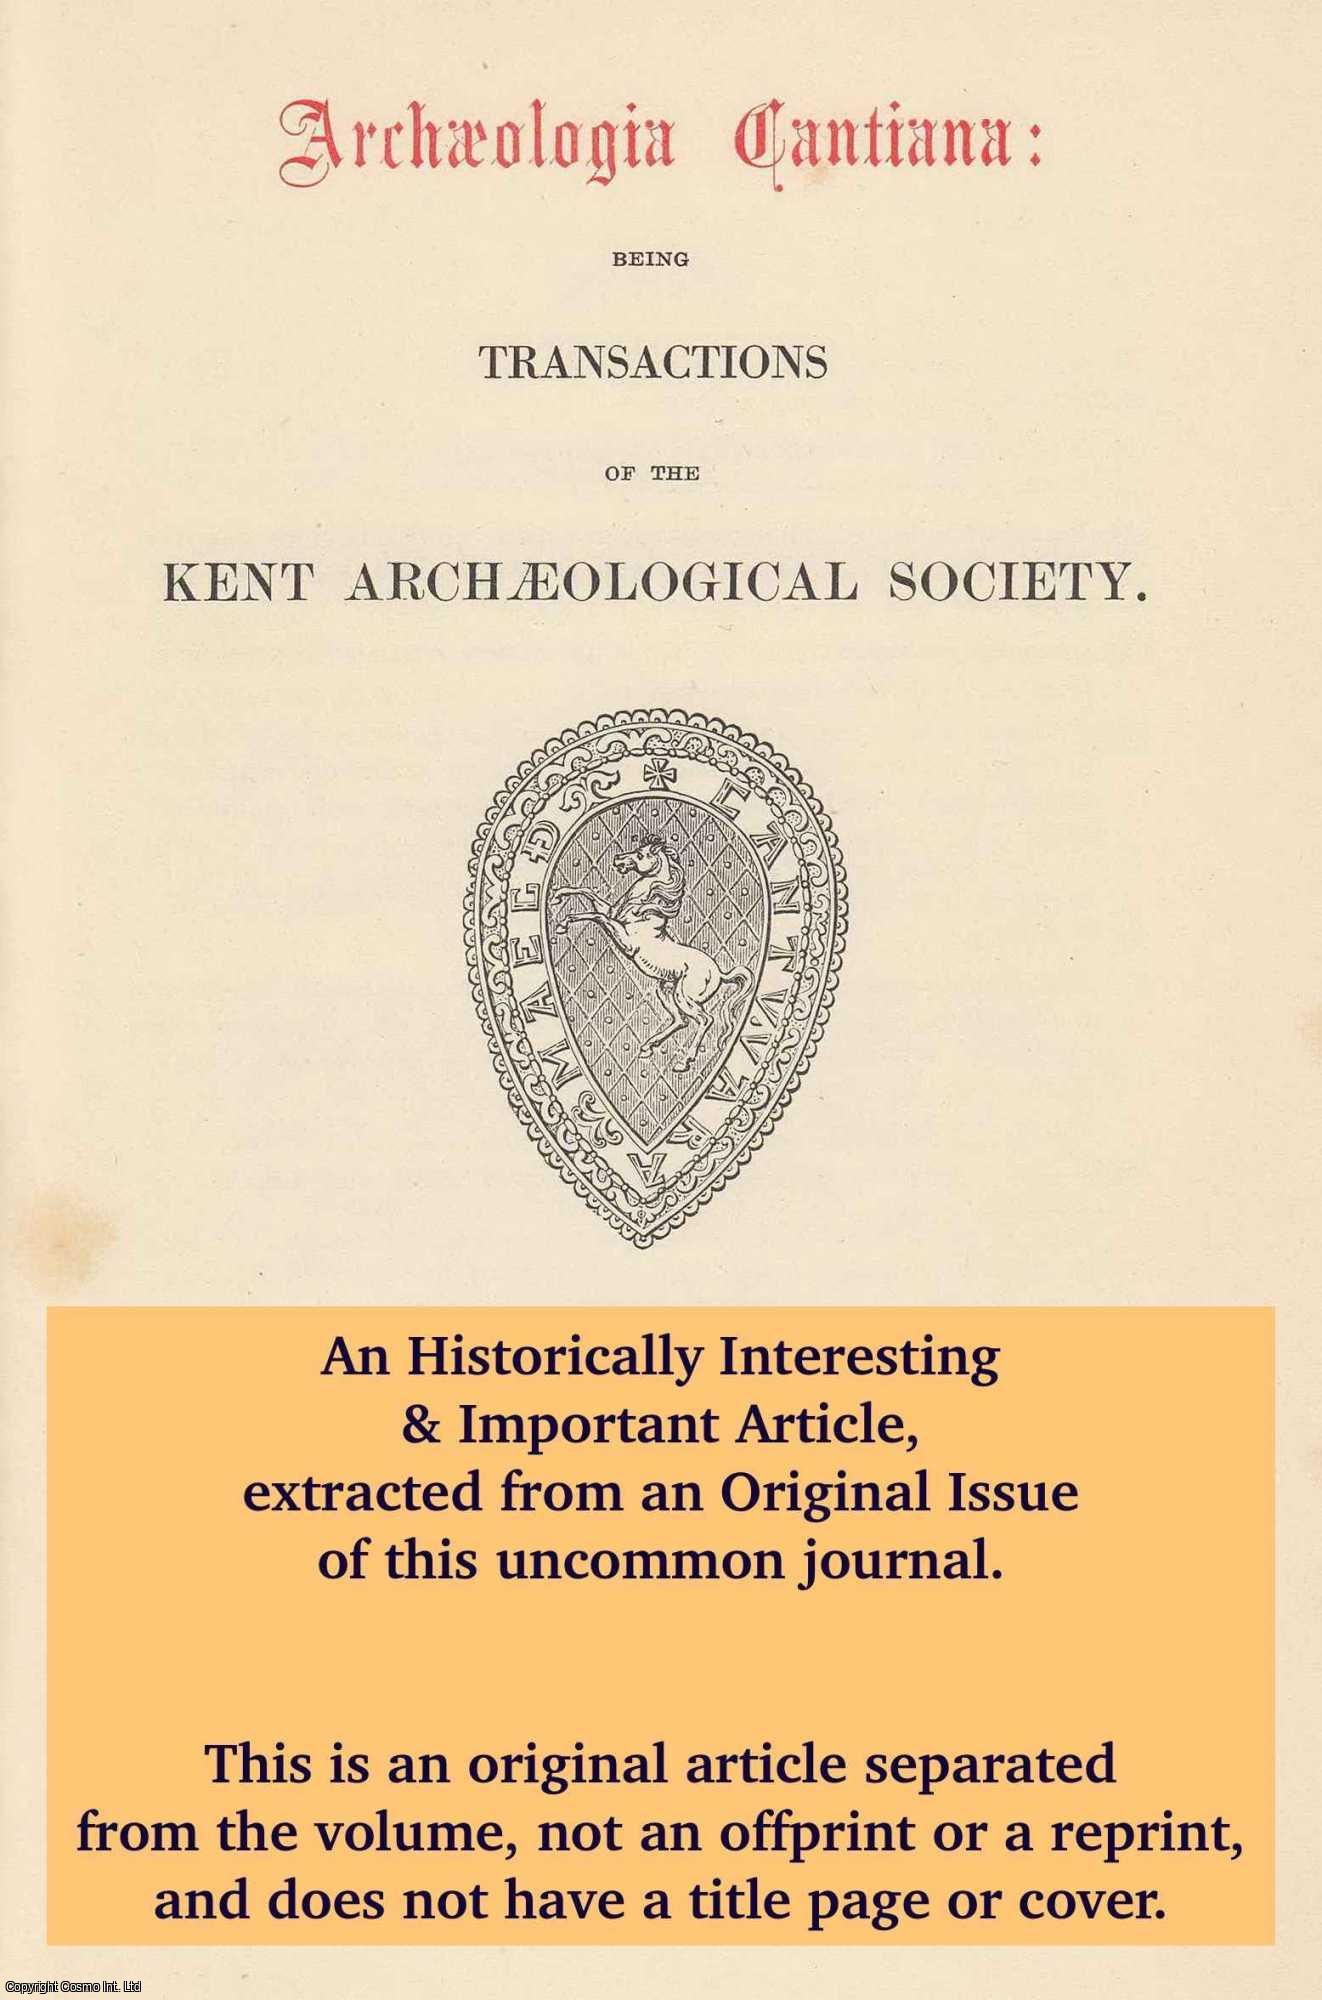 --- - Researches and Discoveries in Kent. A Romano-Gaulish Statuette from Cowden, Kent. An original article from The Archaeologia Cantiana, 1972.